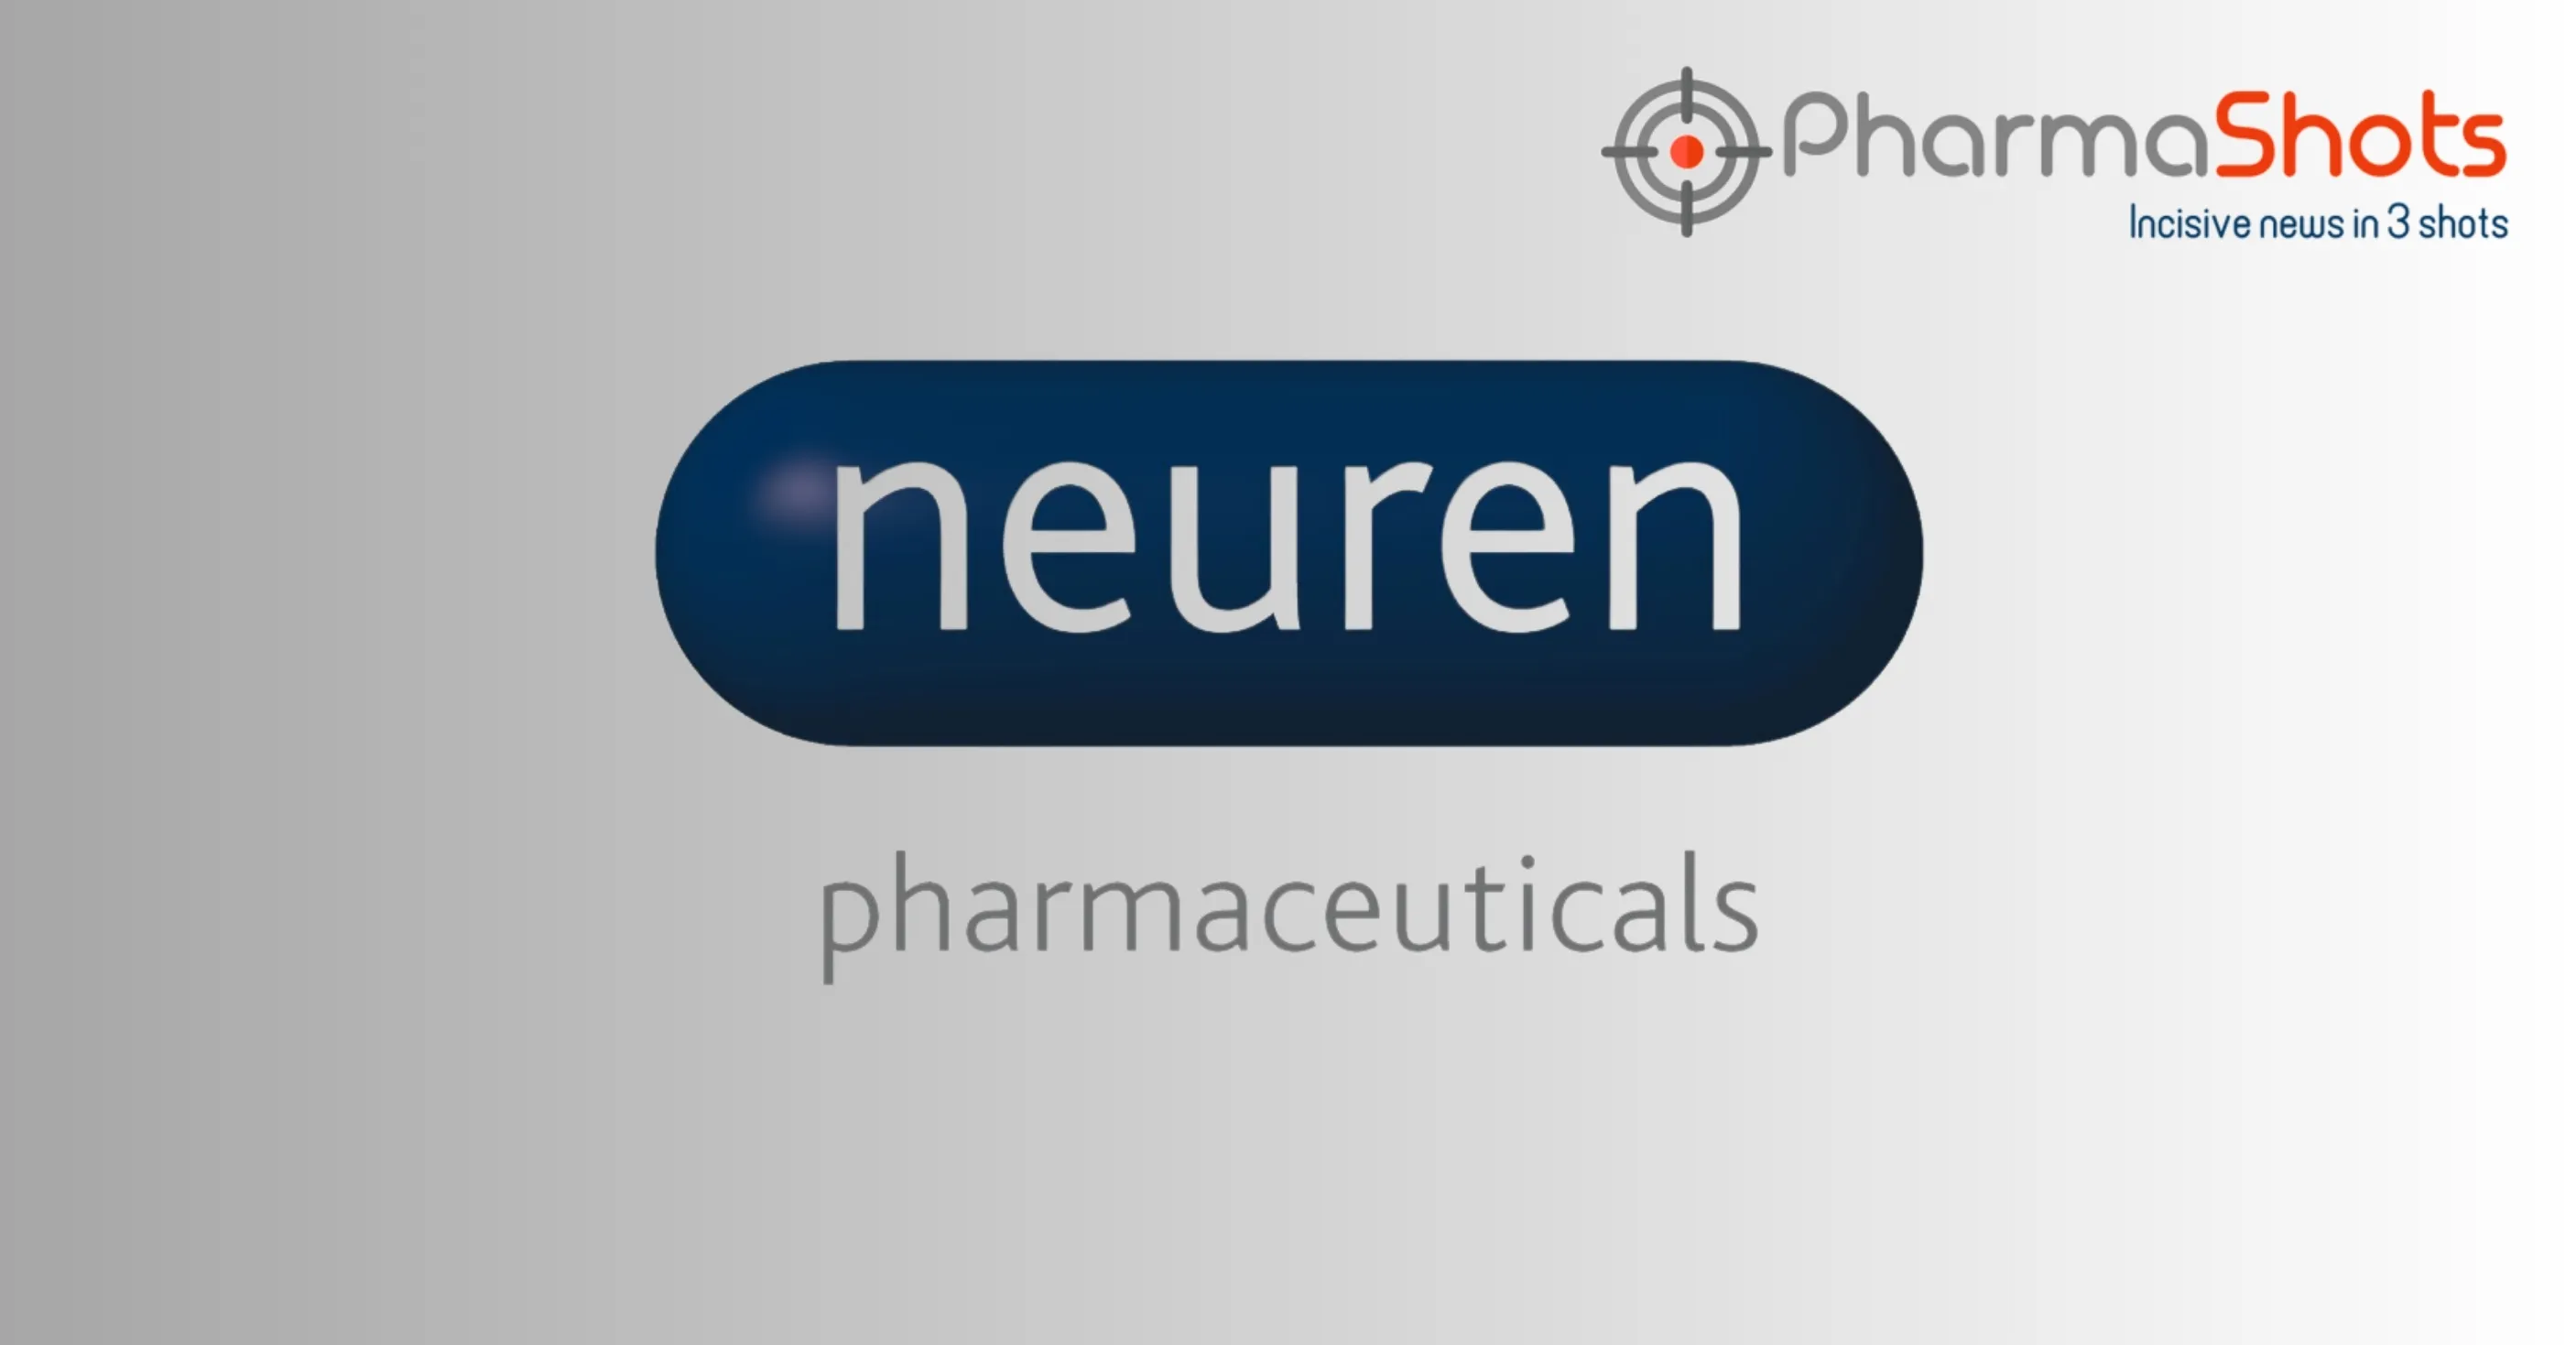 Neuren Reports Results for NNZ-2591 in P-II Trial for the Treatment of Children with Phelan-McDermid Syndrome (PMS)